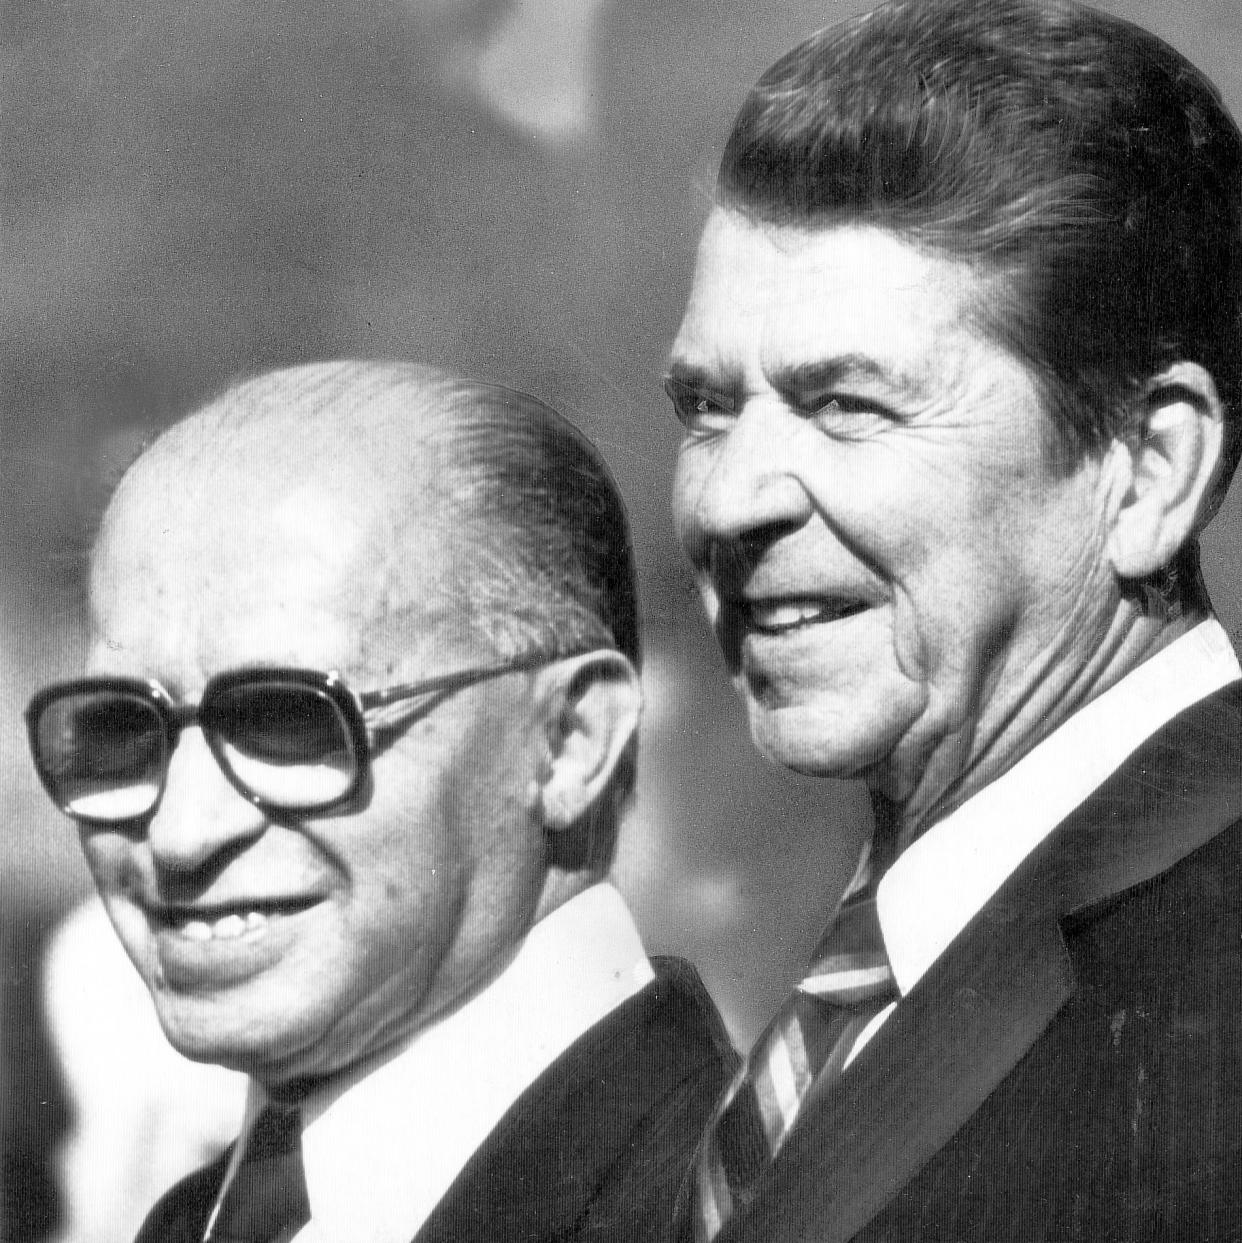 Mr Begin and Mr Reagan seen standing together in a black and white shot